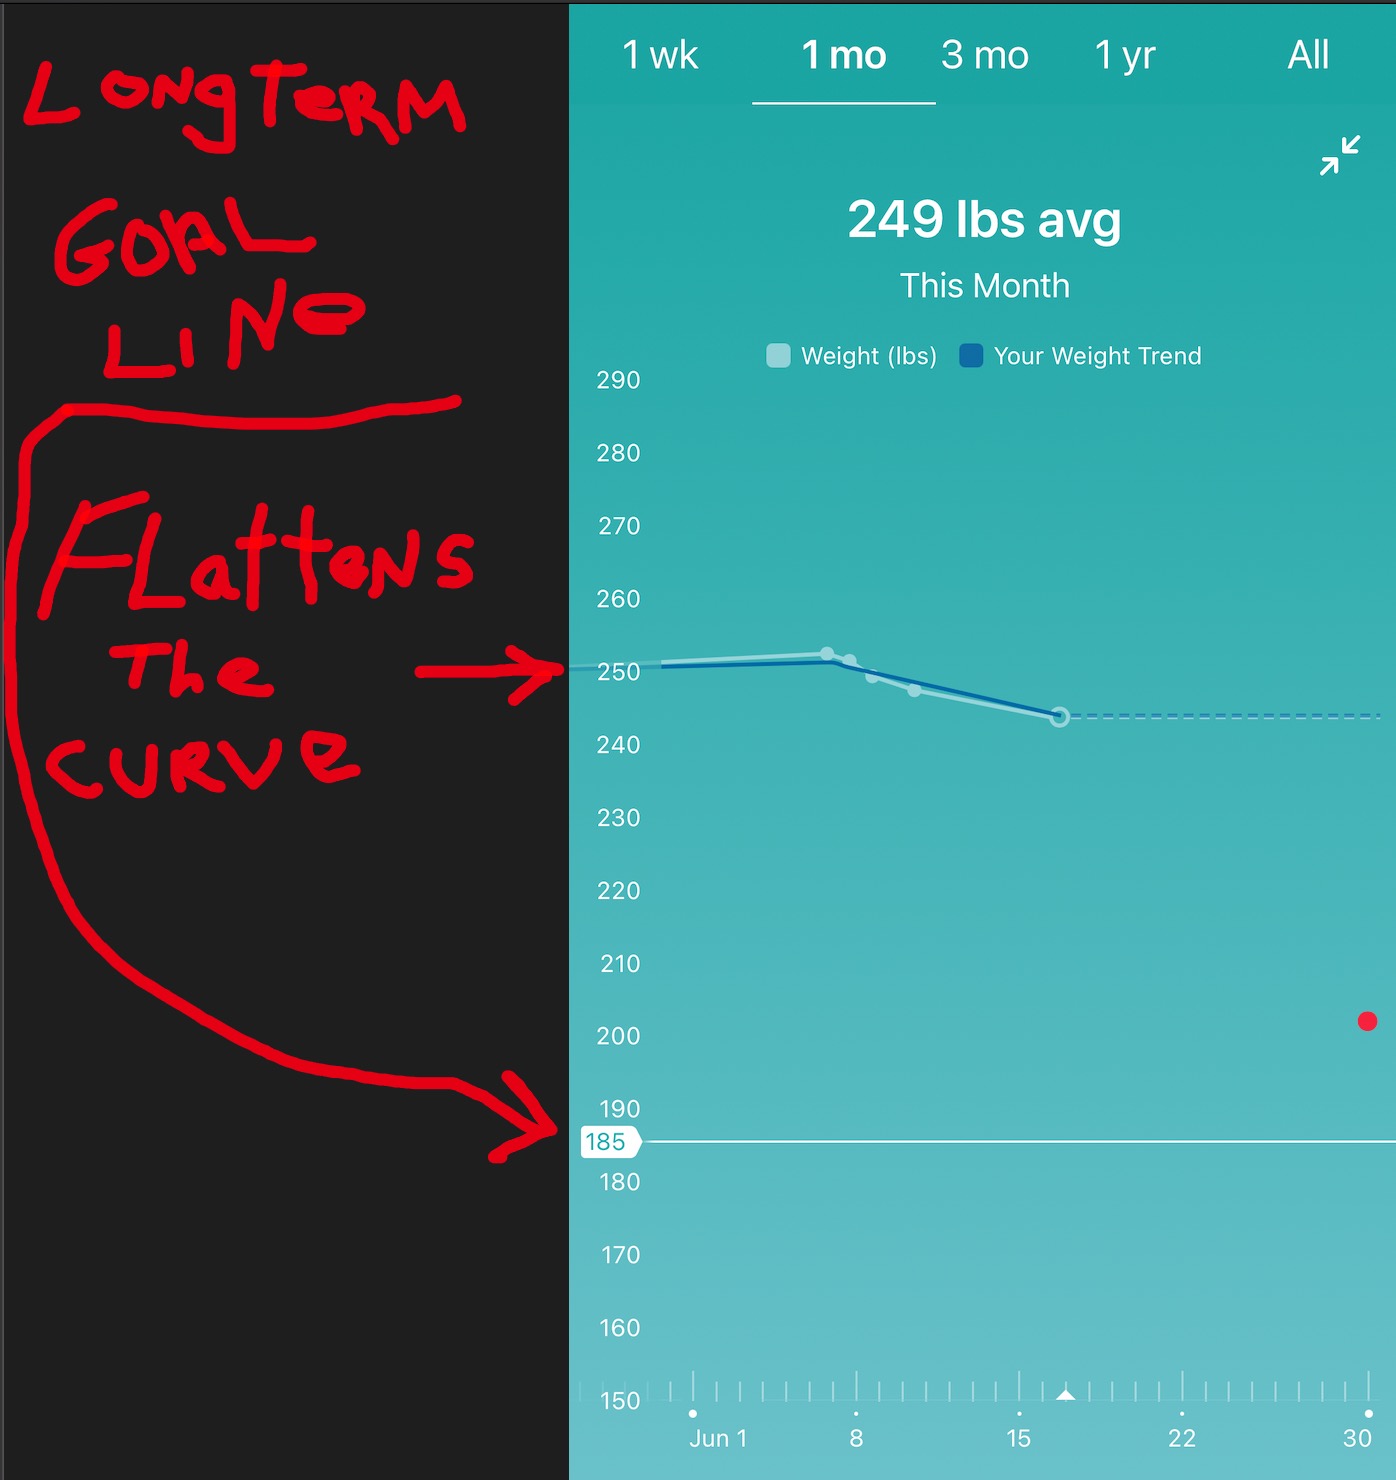 FitBit app shows flatten curves because of long-term goal line